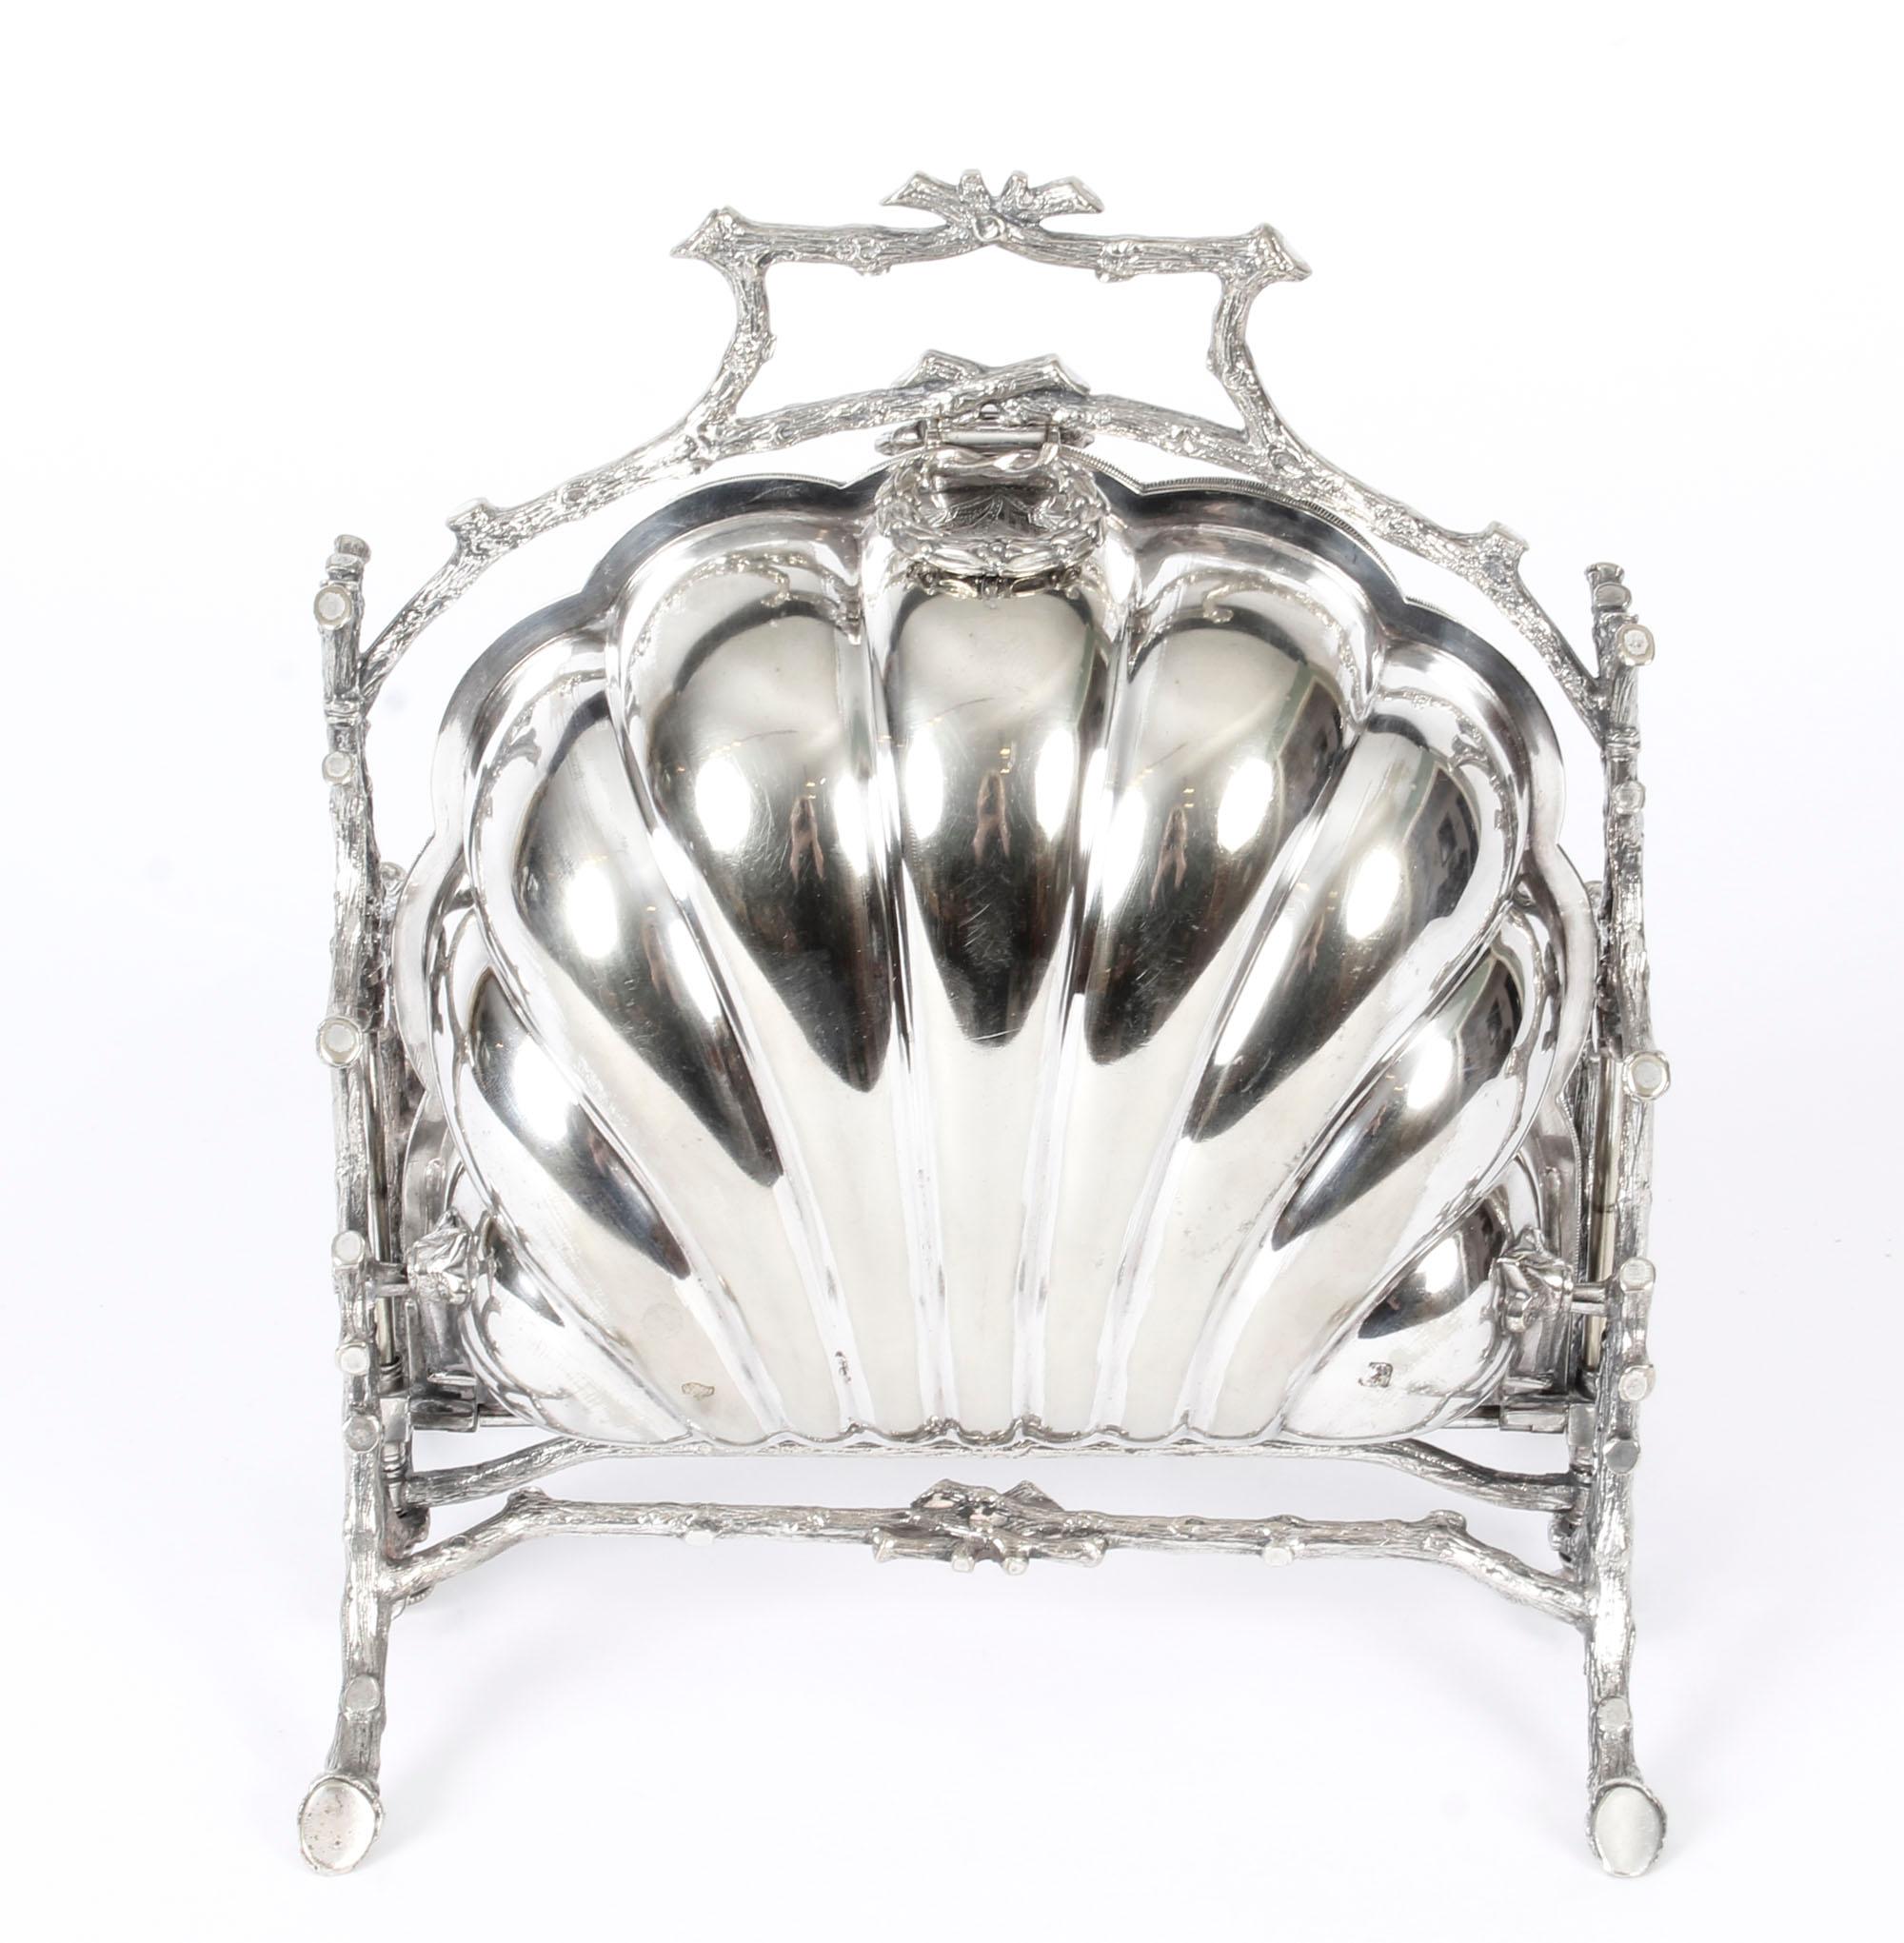 This is a highly decorative antique Victorian silver plated folding biscuit box, the base bearing the makers' mark of the renowned silversmiths Fenton Brothers of Sheffield, England, circa 1890 in date and bearing the registration number 3549 as